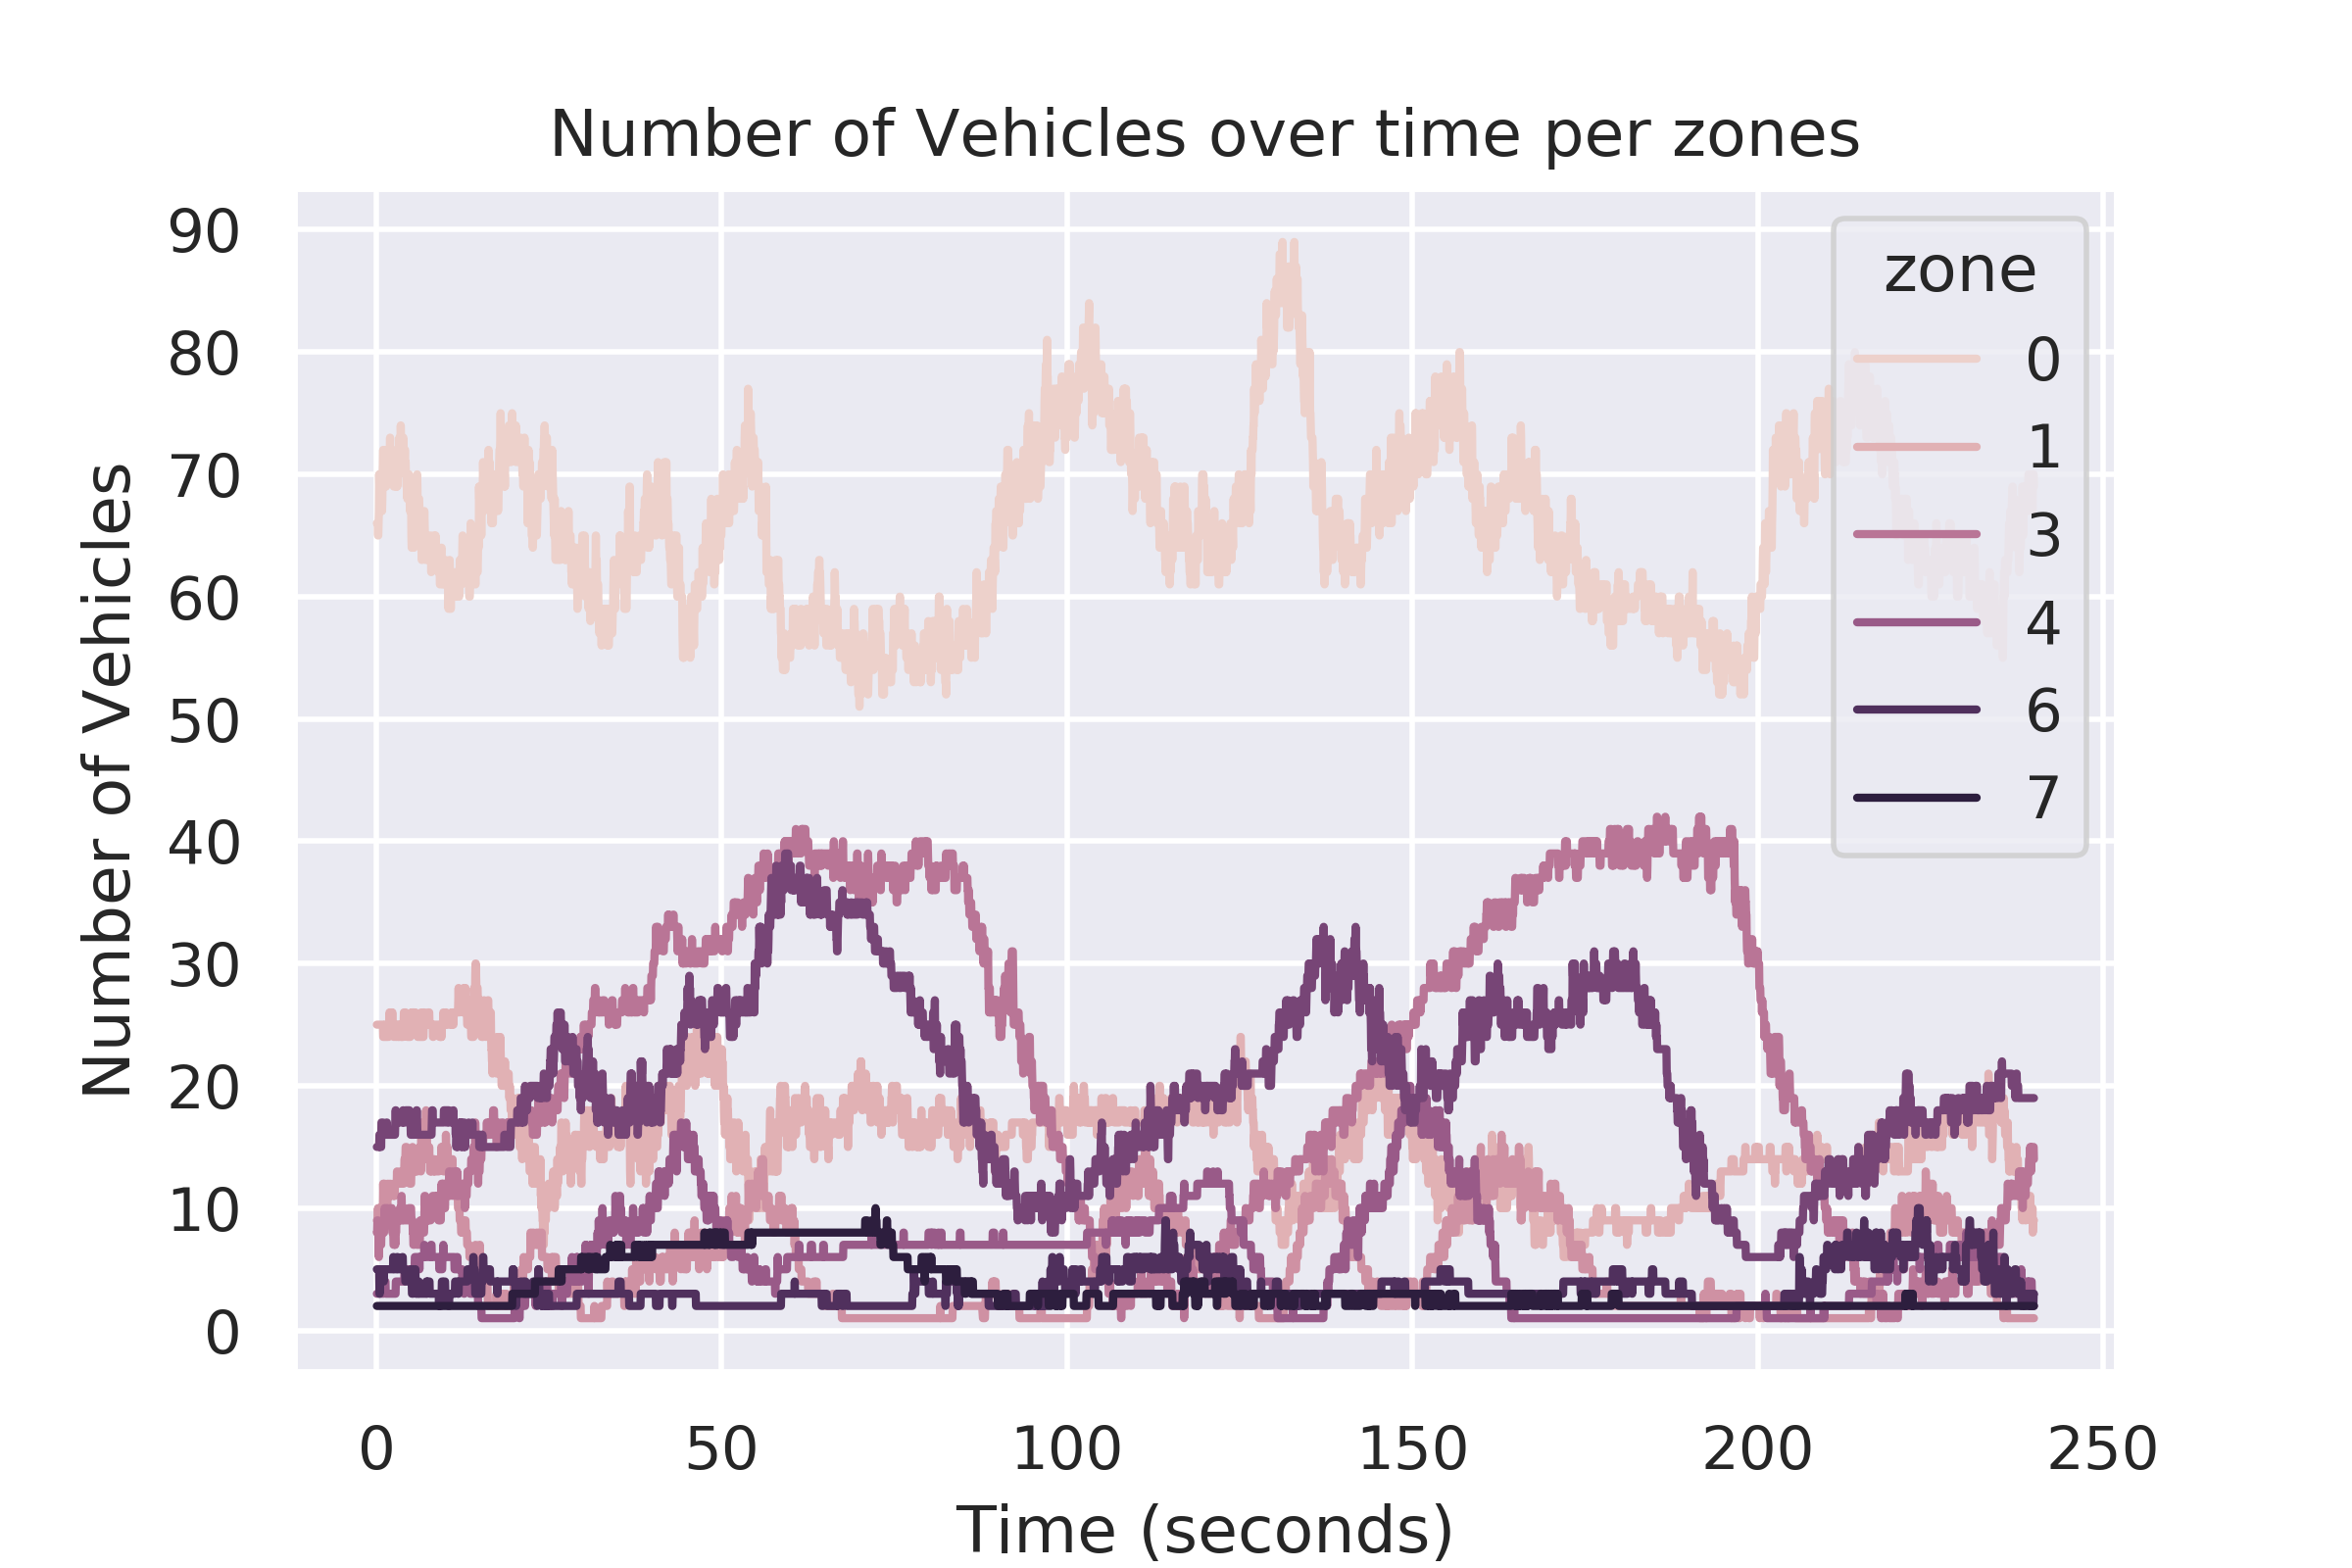 Nbre of vehicles_per_zones_over_time.png